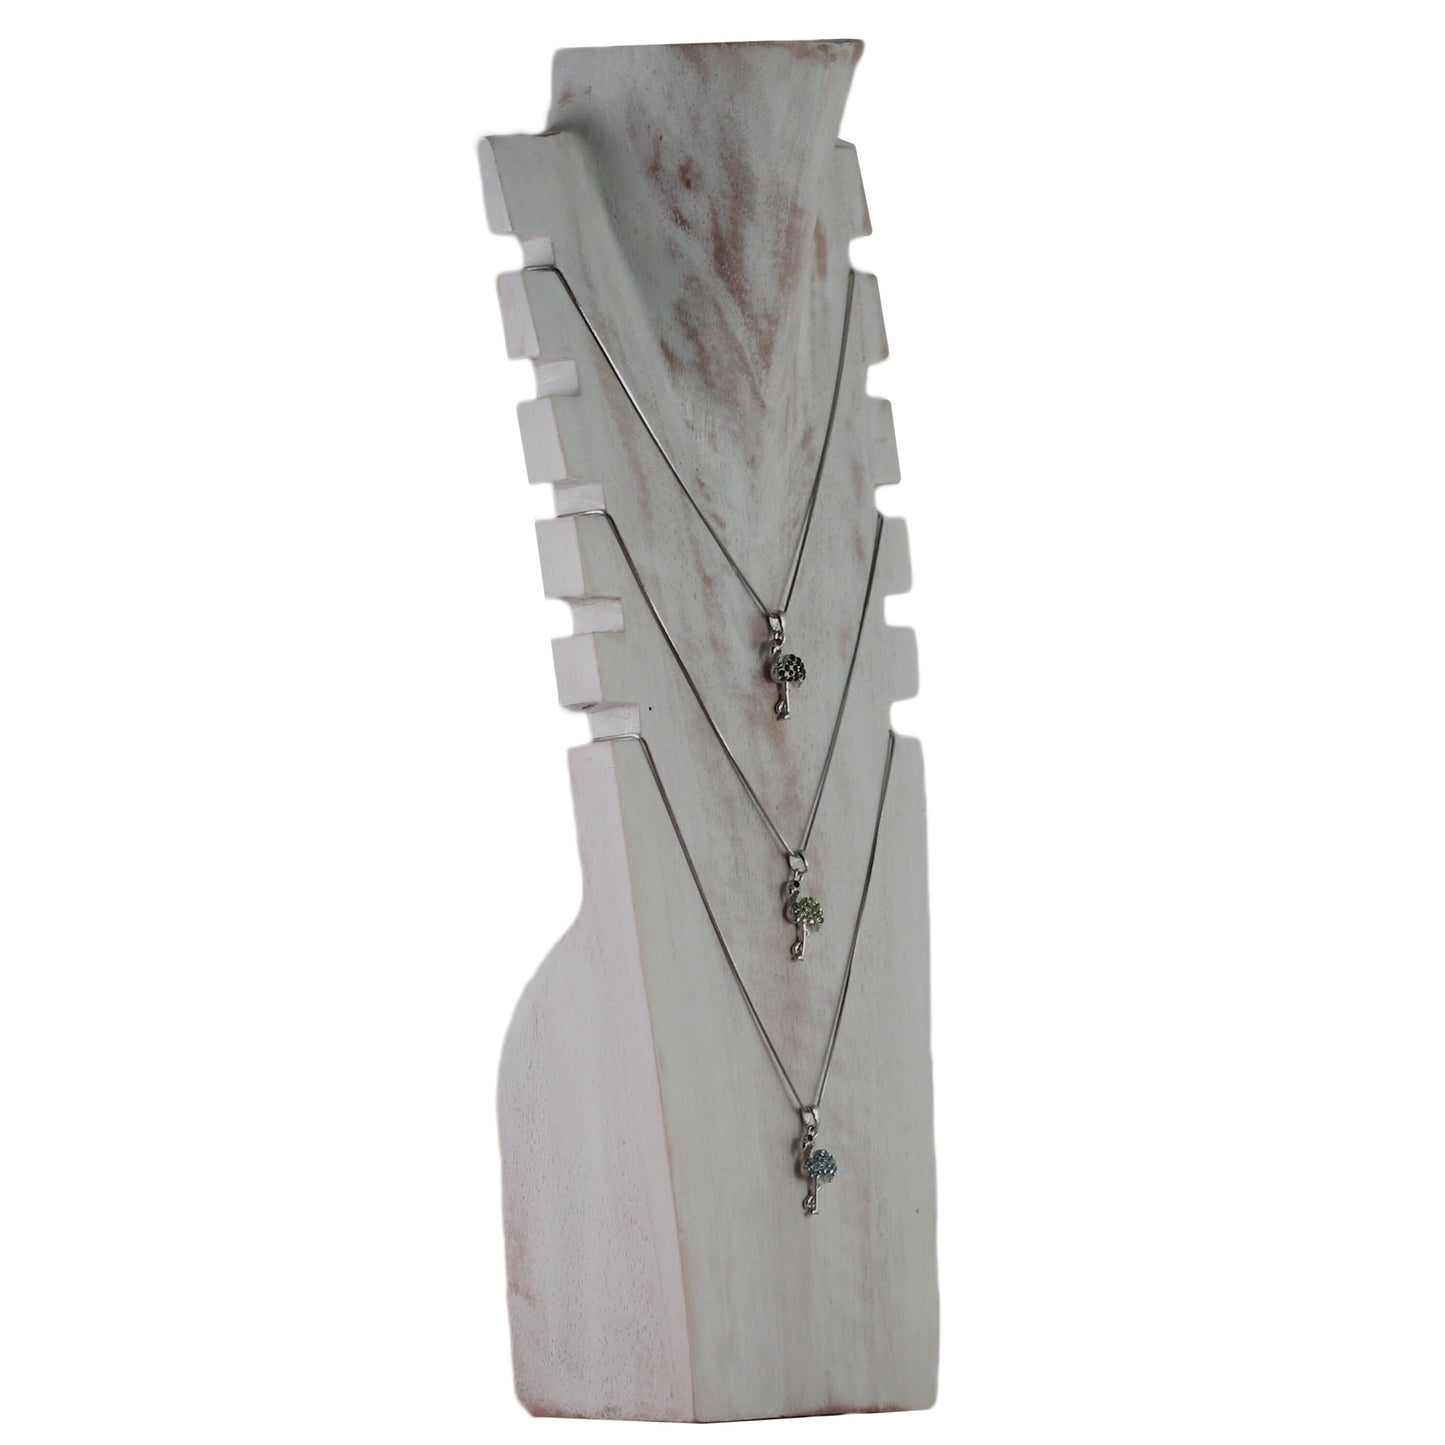 40 cm necklace stand jewelry stand chain display jewelry bust made of wood for several necklaces White wash